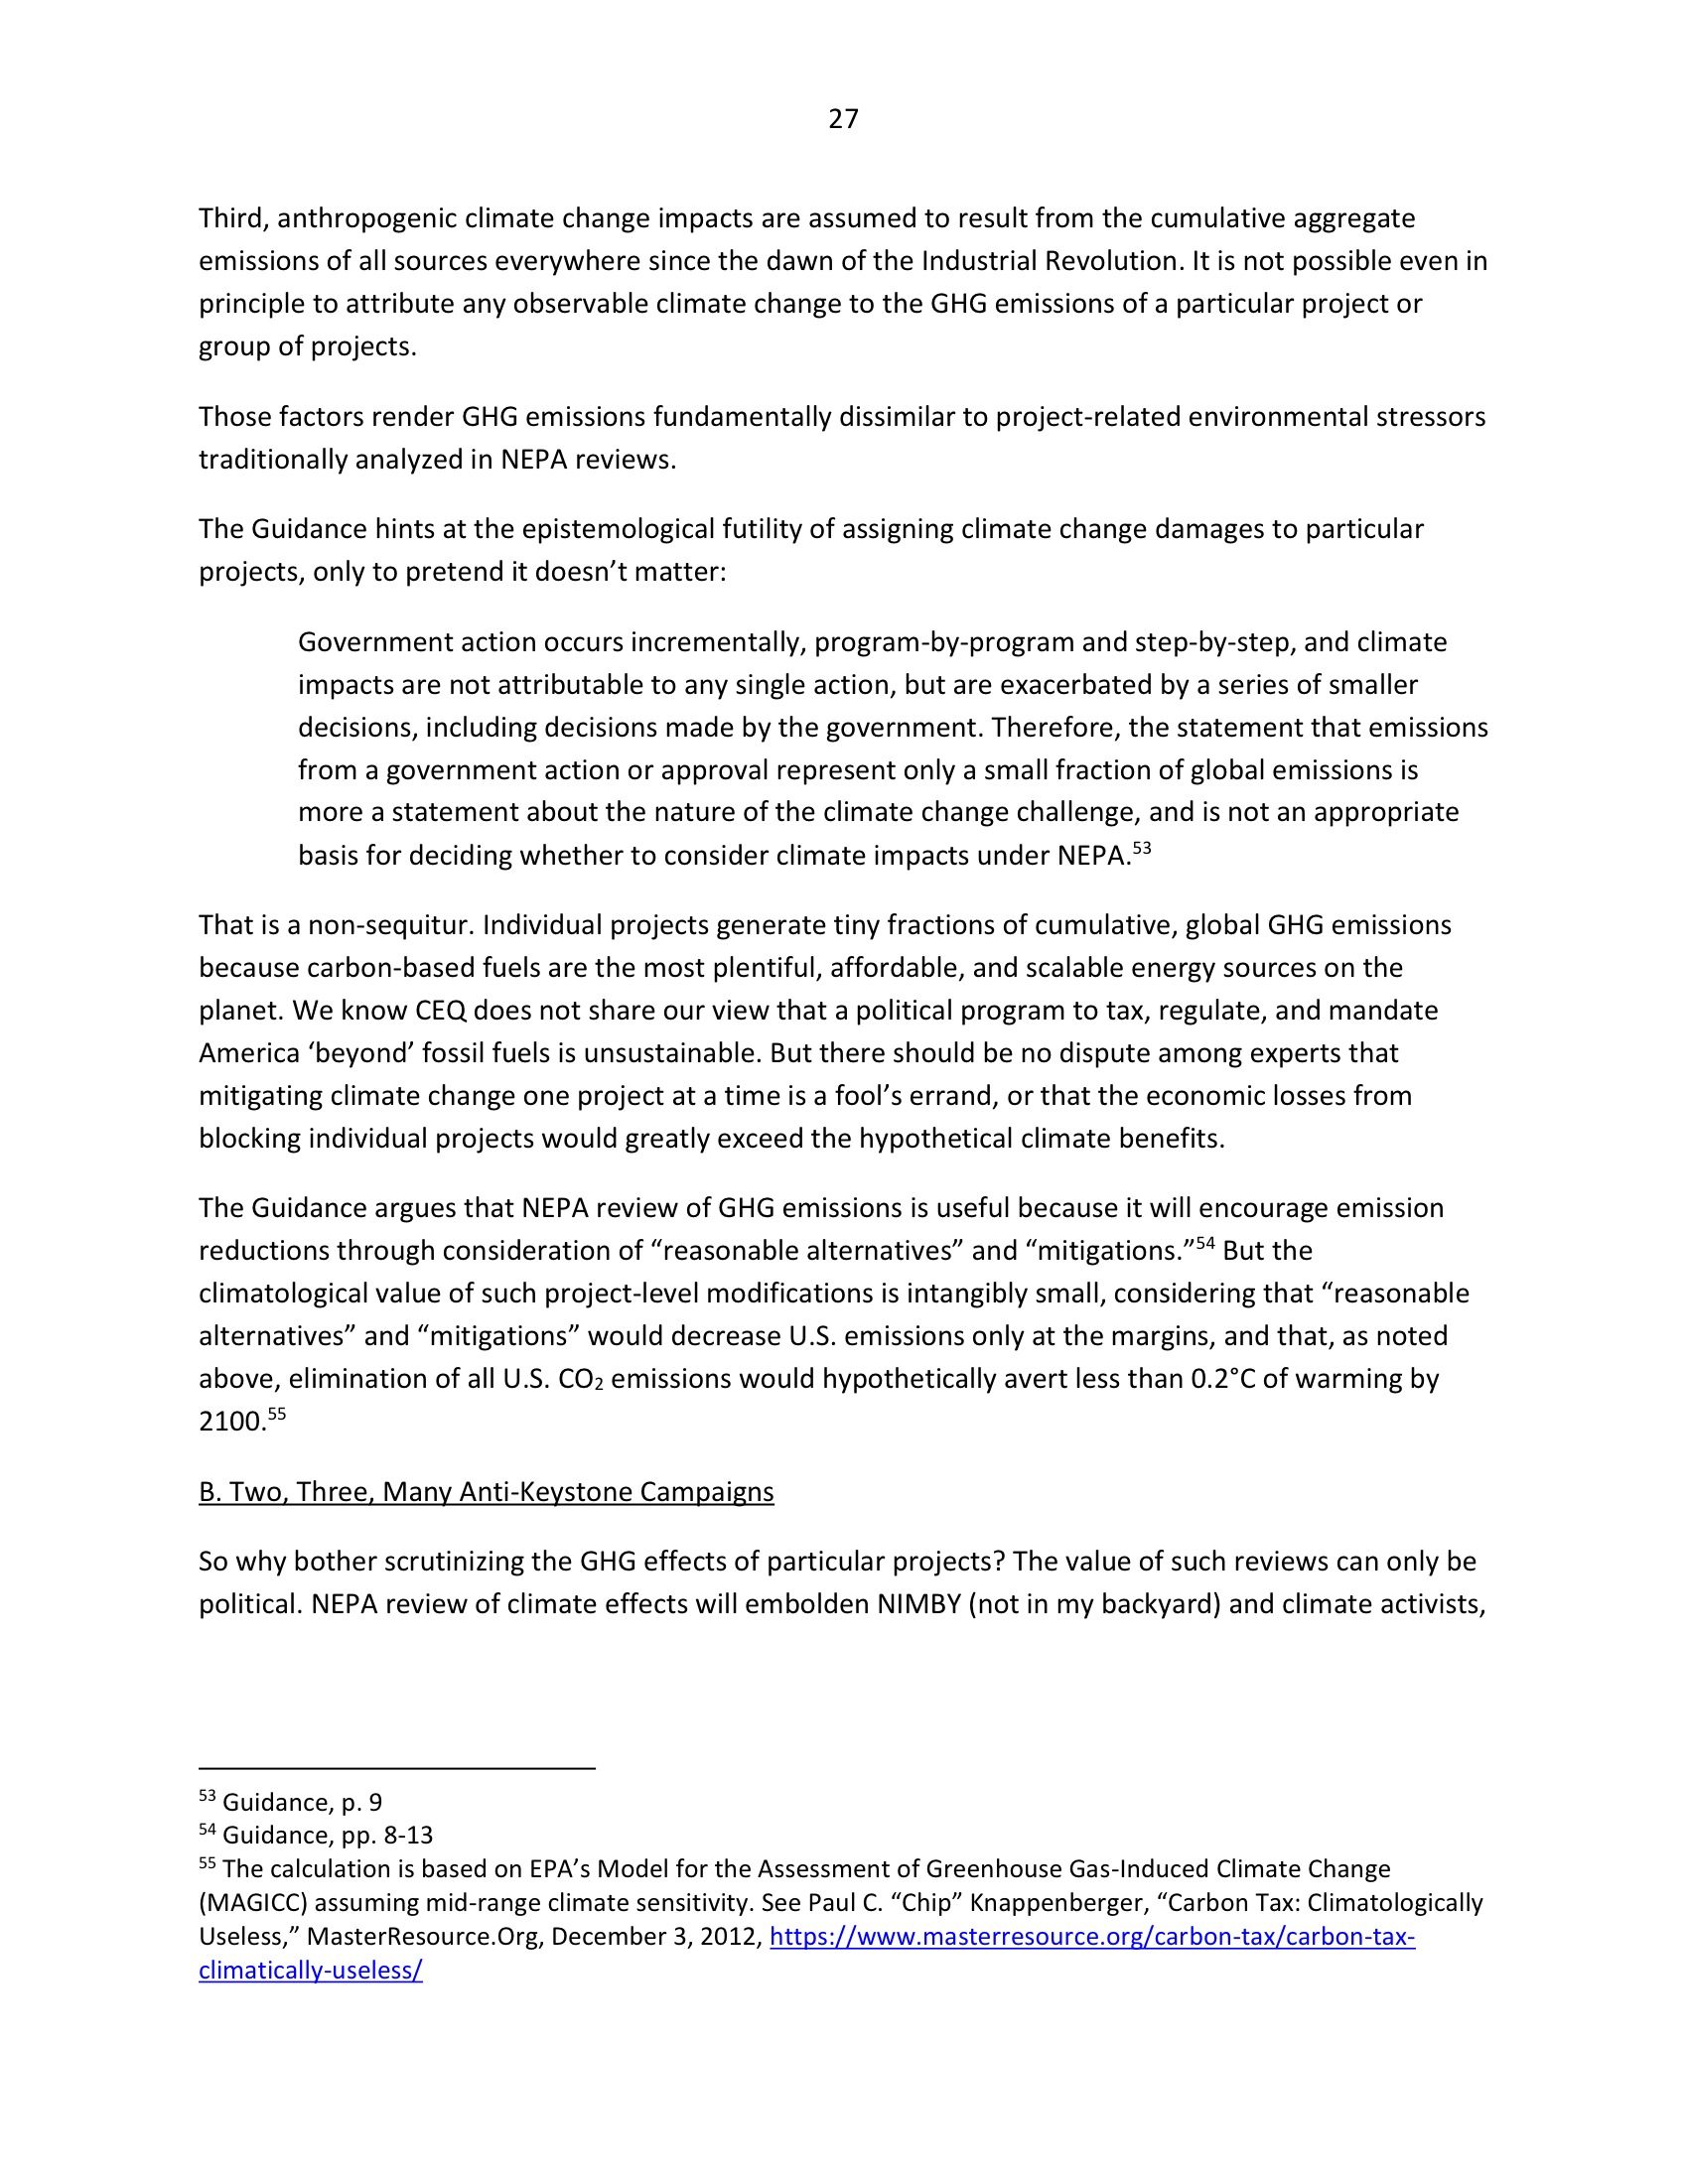 Marlo Lewis Competitive Enterprise Institute and Free Market Allies Comment Letter on NEPA GHG Guidance Document 99-27